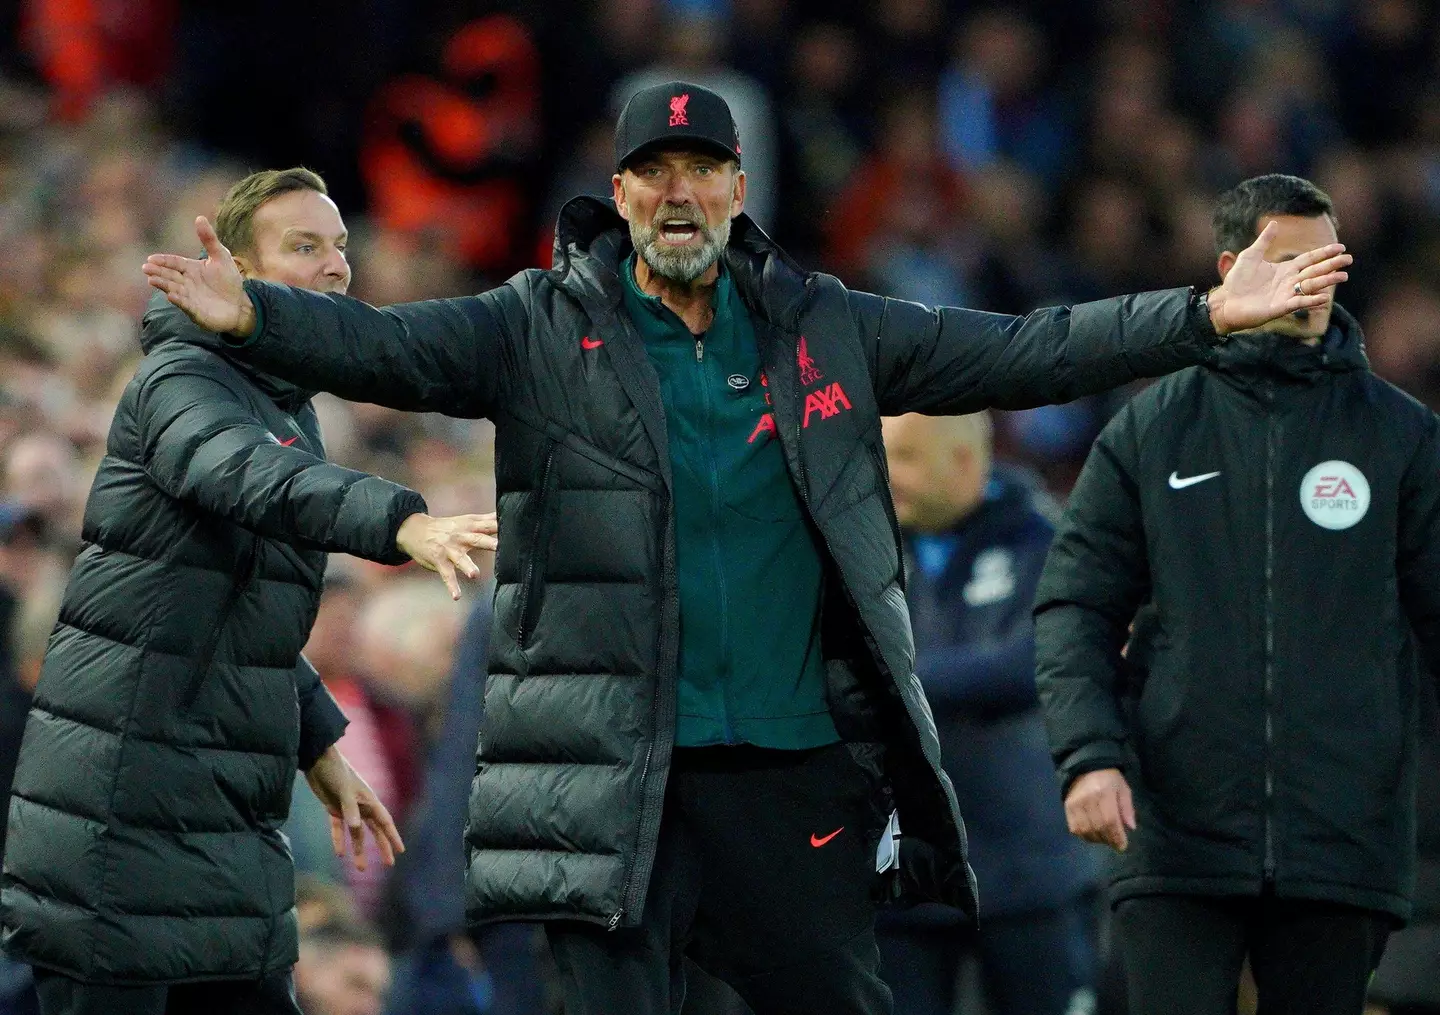 Klopp apologised for his touchline behaviour after the match (Image: Alamy)